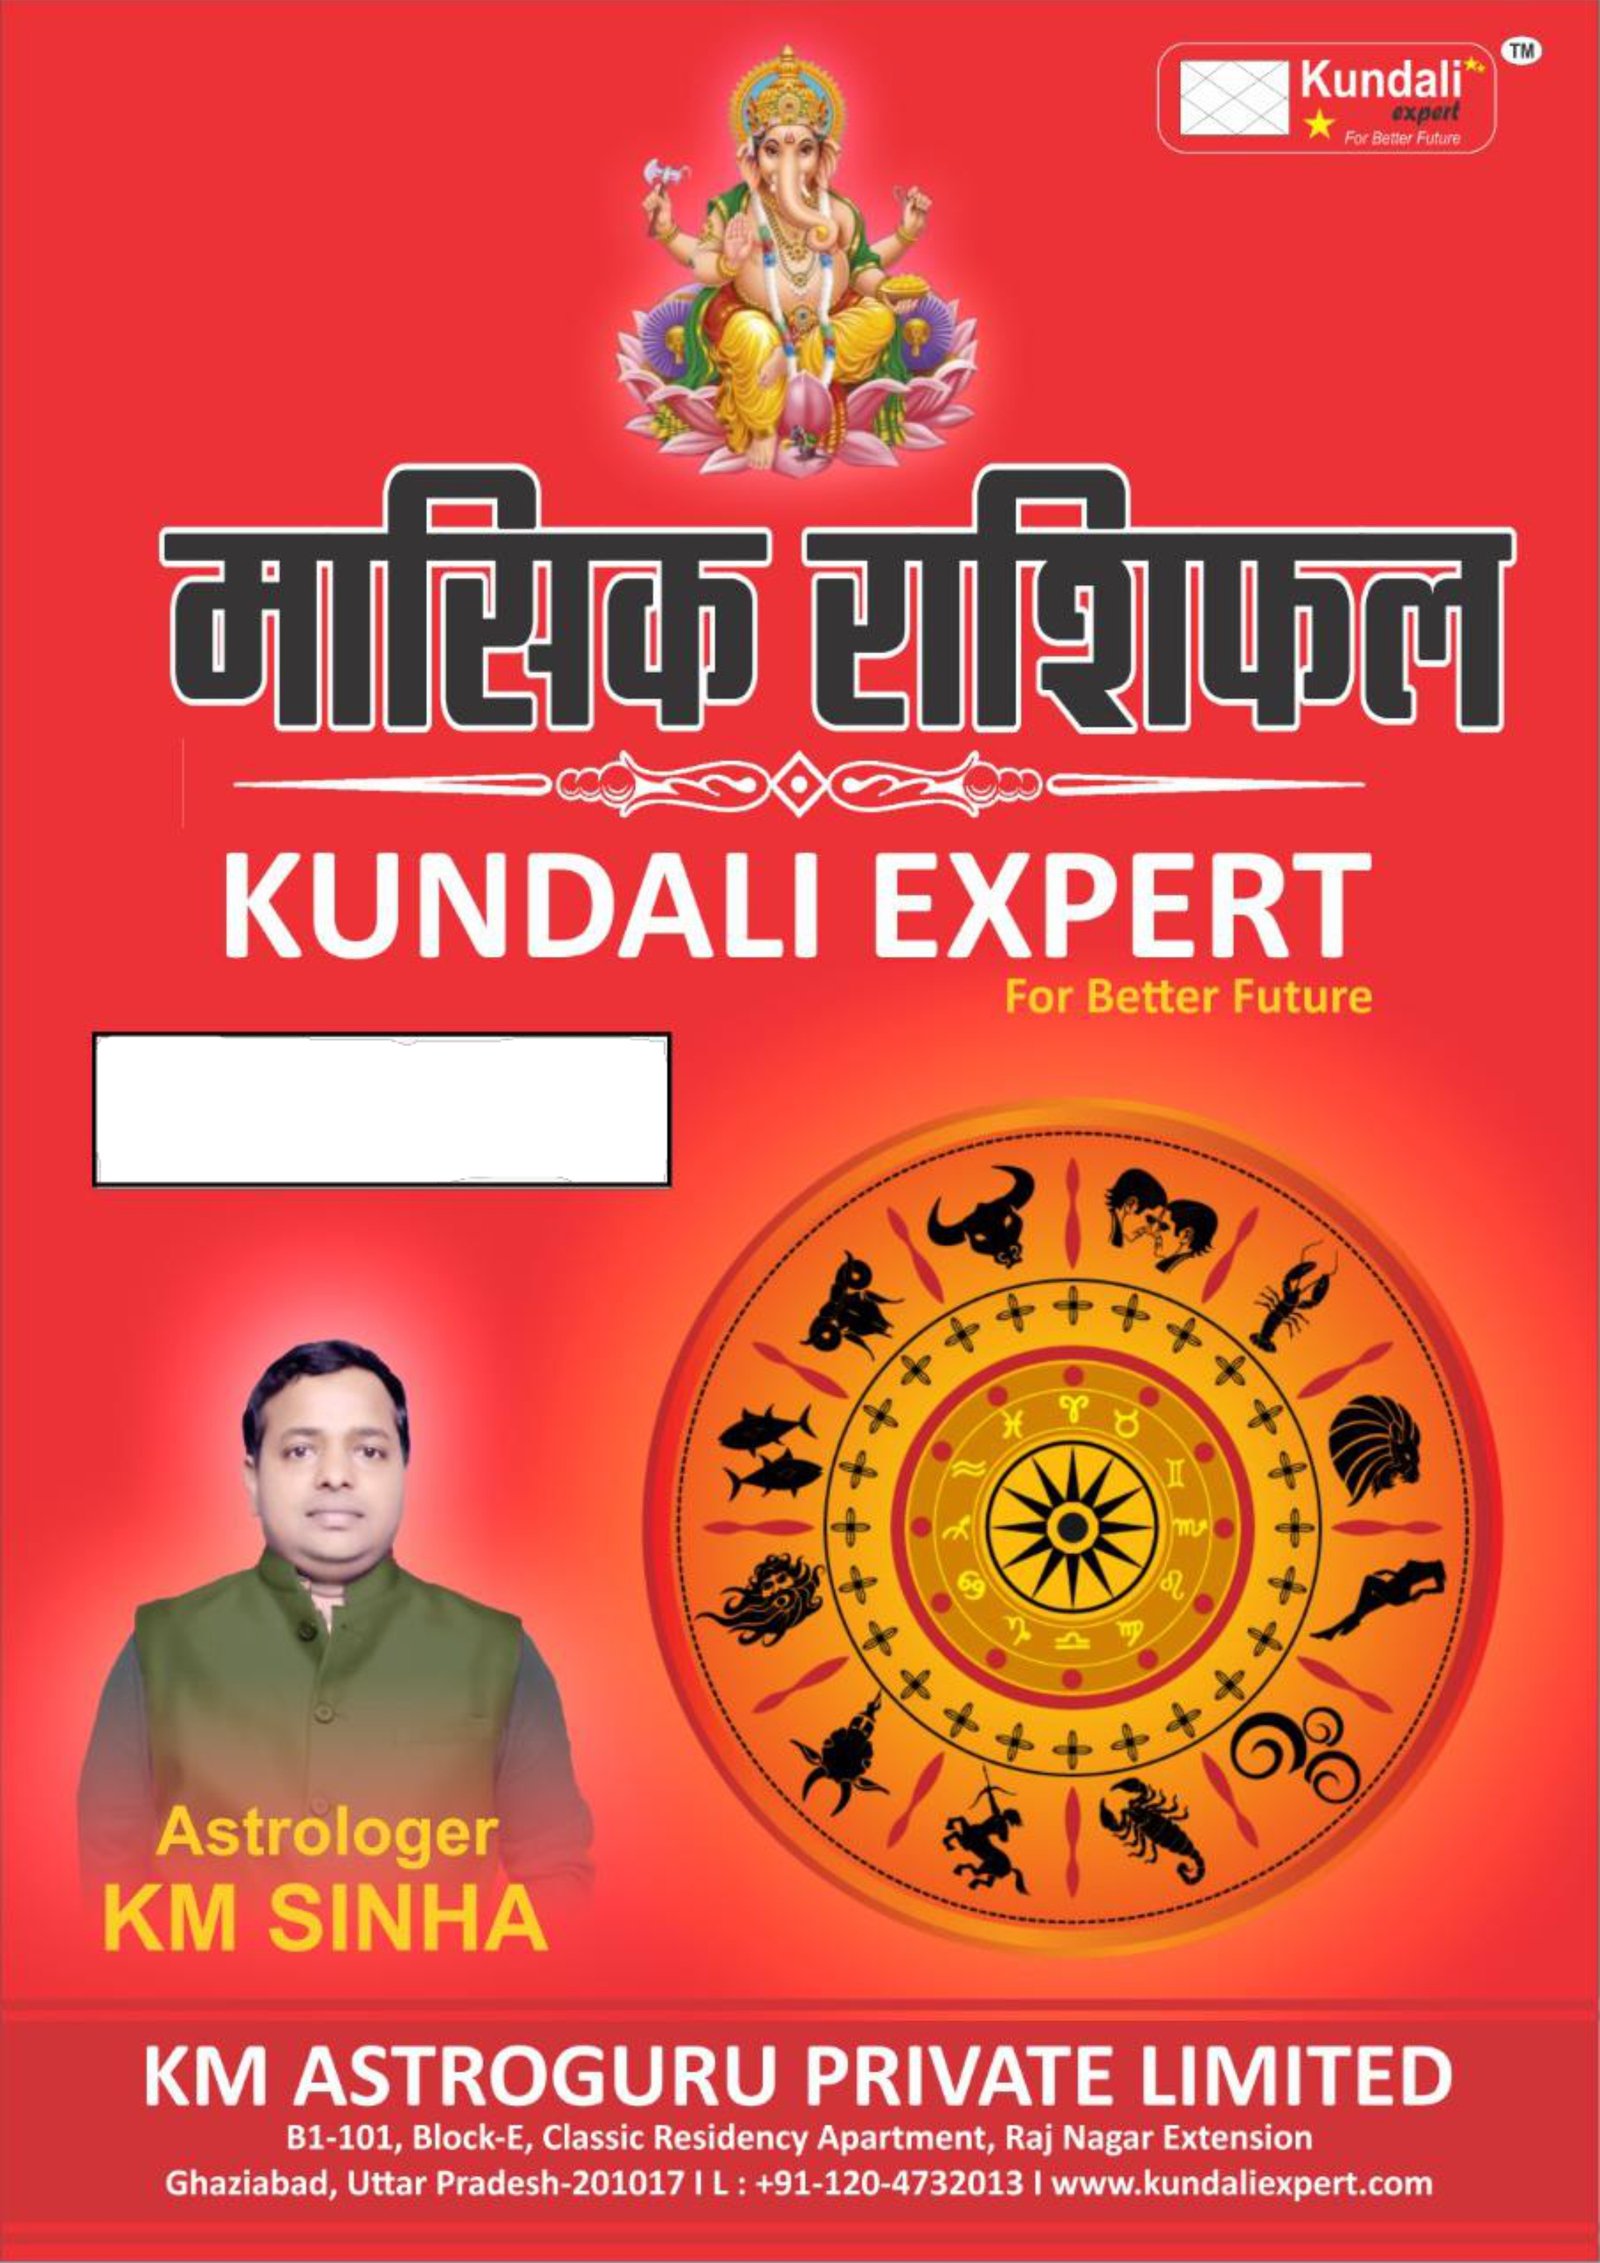 Kundali Expert - Watch the latest prediction of world famous astrologer KM  Sinha on Unlocking India after almost one month of lockdown. Watch in  YouTube channel - Kundali Expert #astrologerkmsinha #kundaliexpert  #predictiononcorona #